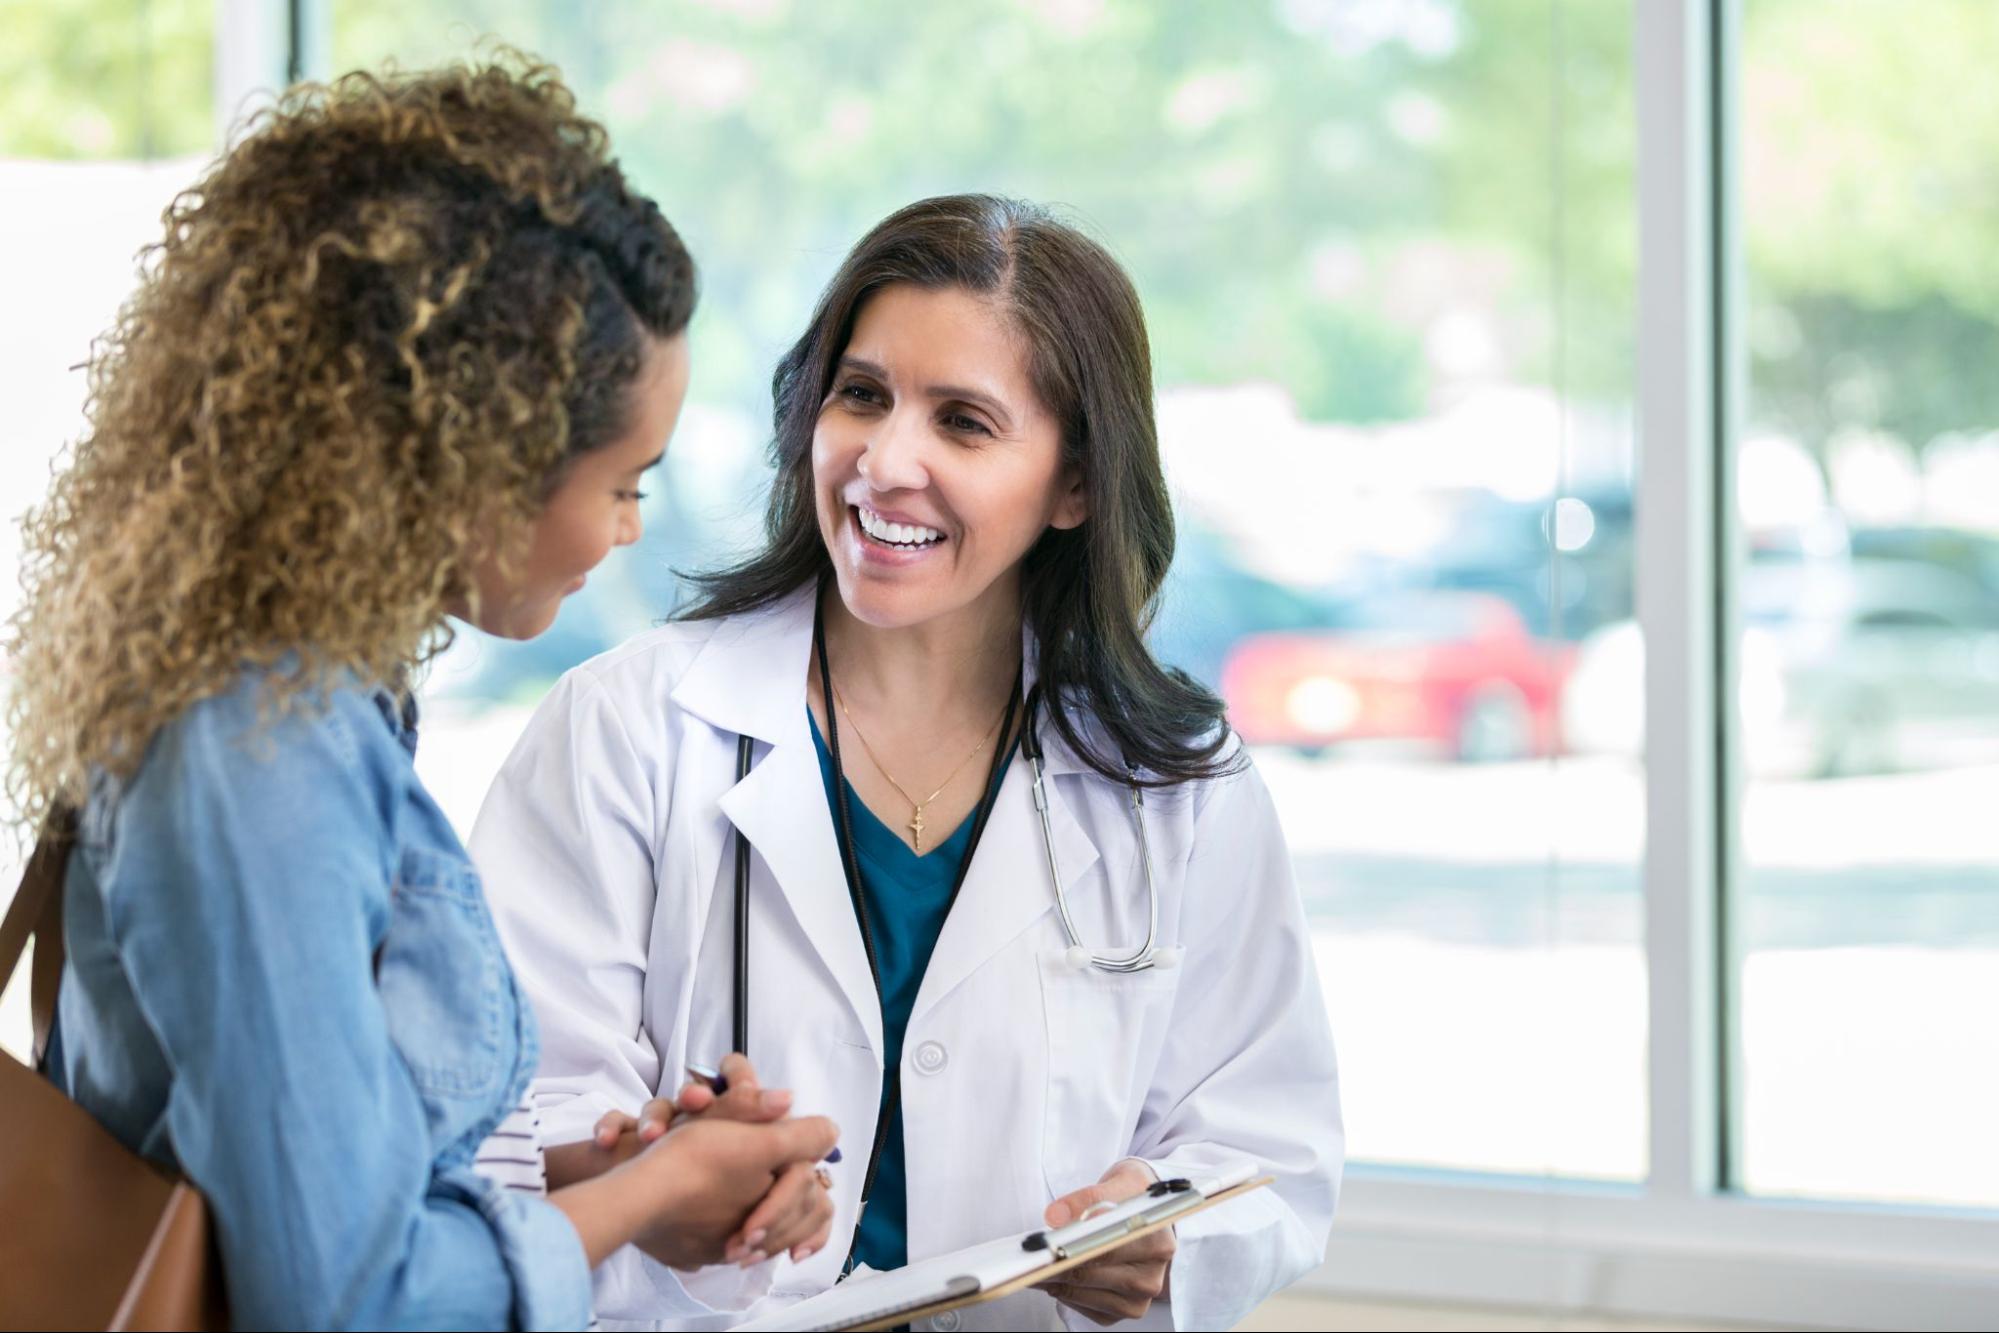 How Often Should You Schedule a Gynecological Check-up?